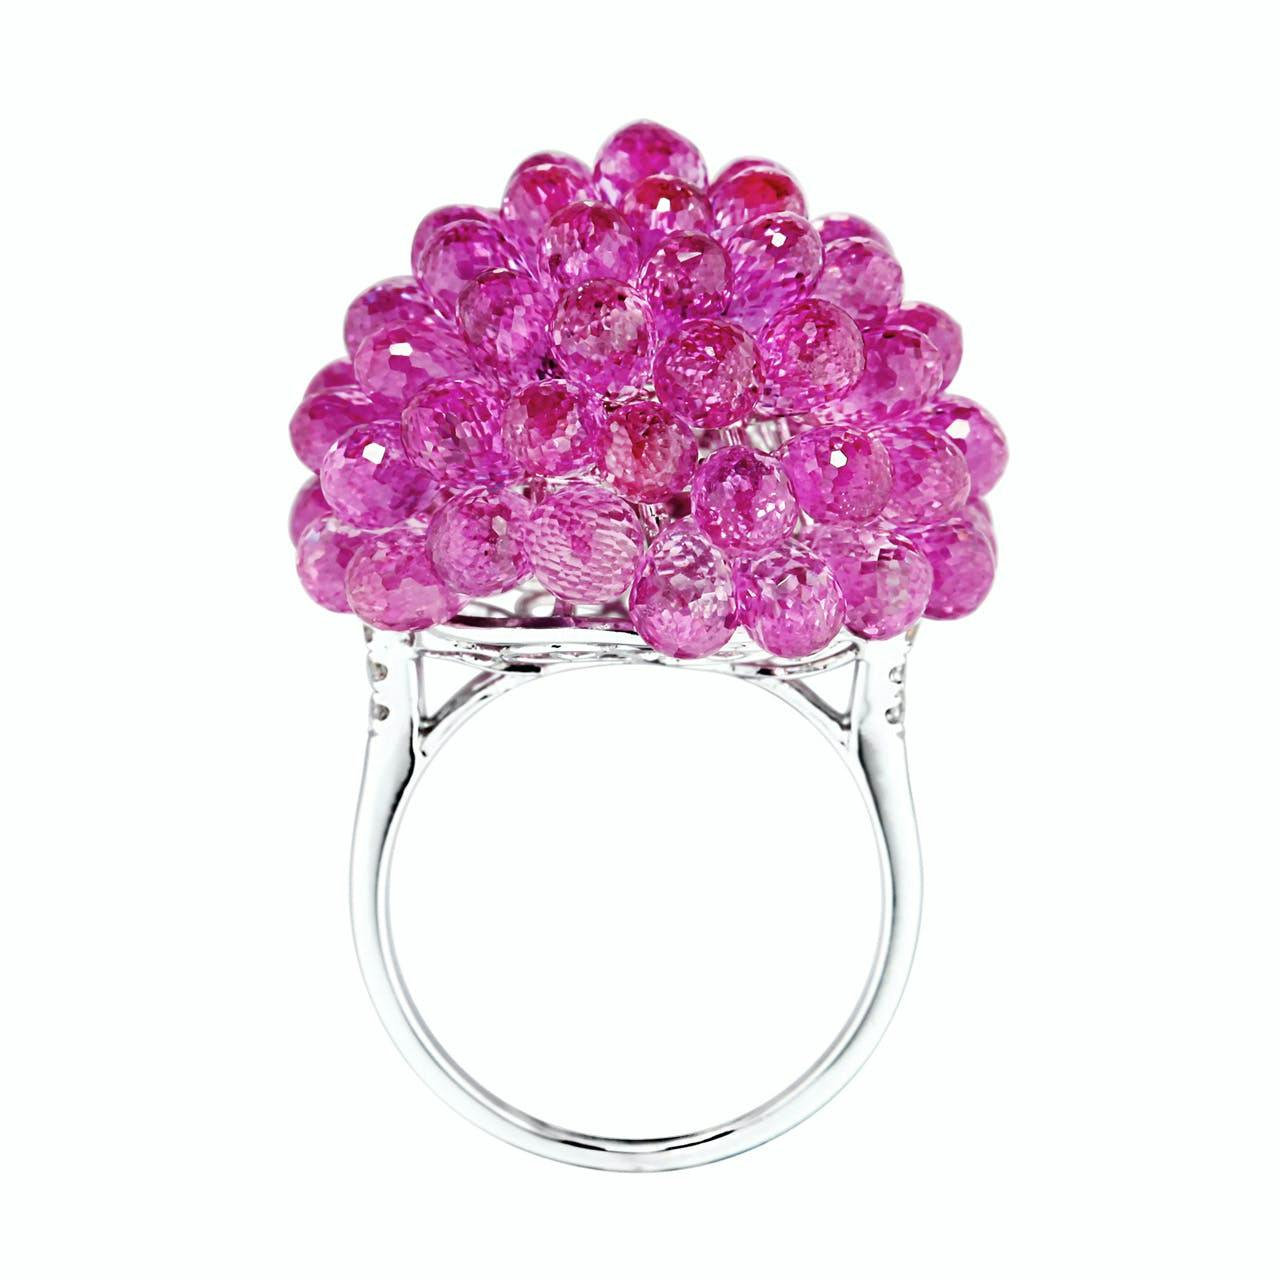 vivid color pink sapphire World-class jewelry hk hong kong manufacturer Sustainability Sustainable RJC Responsible Jewellery Council BSCI Business Social Compliance Initiative